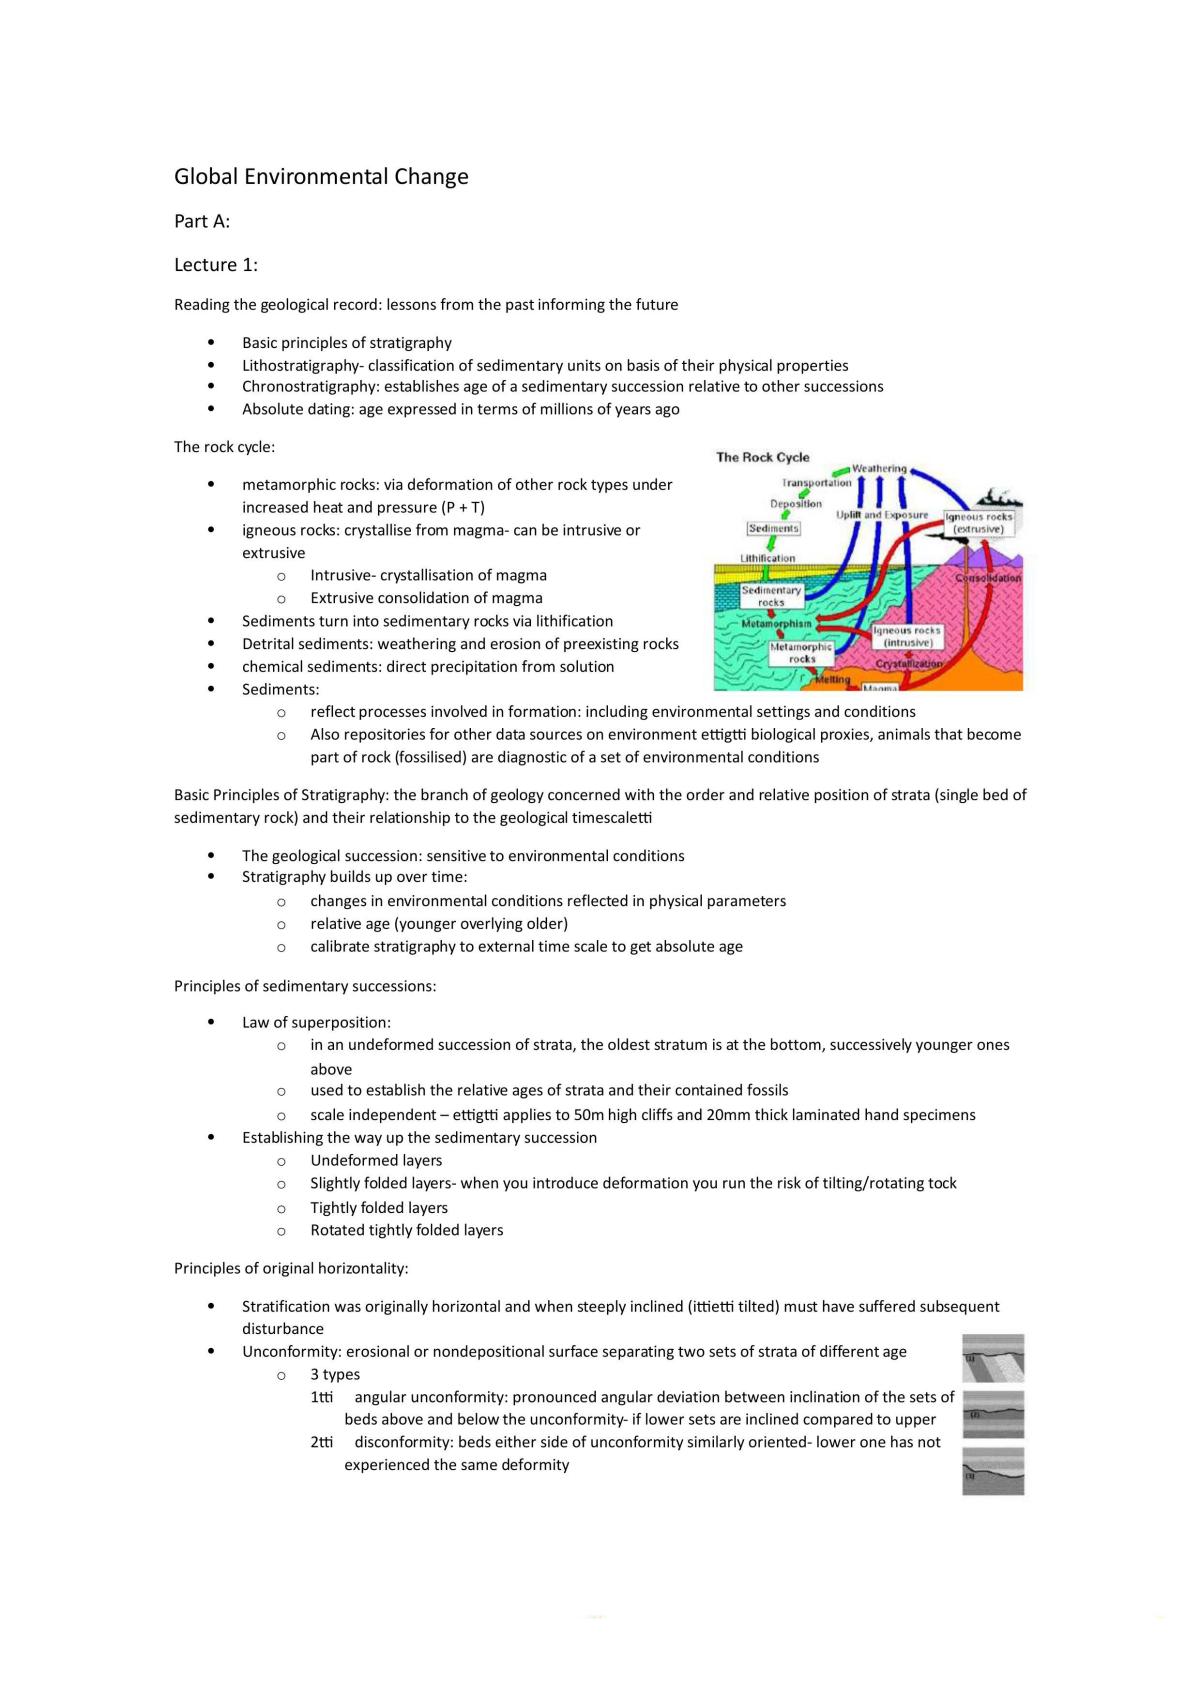 Notes for Global Environmental Change - Page 1